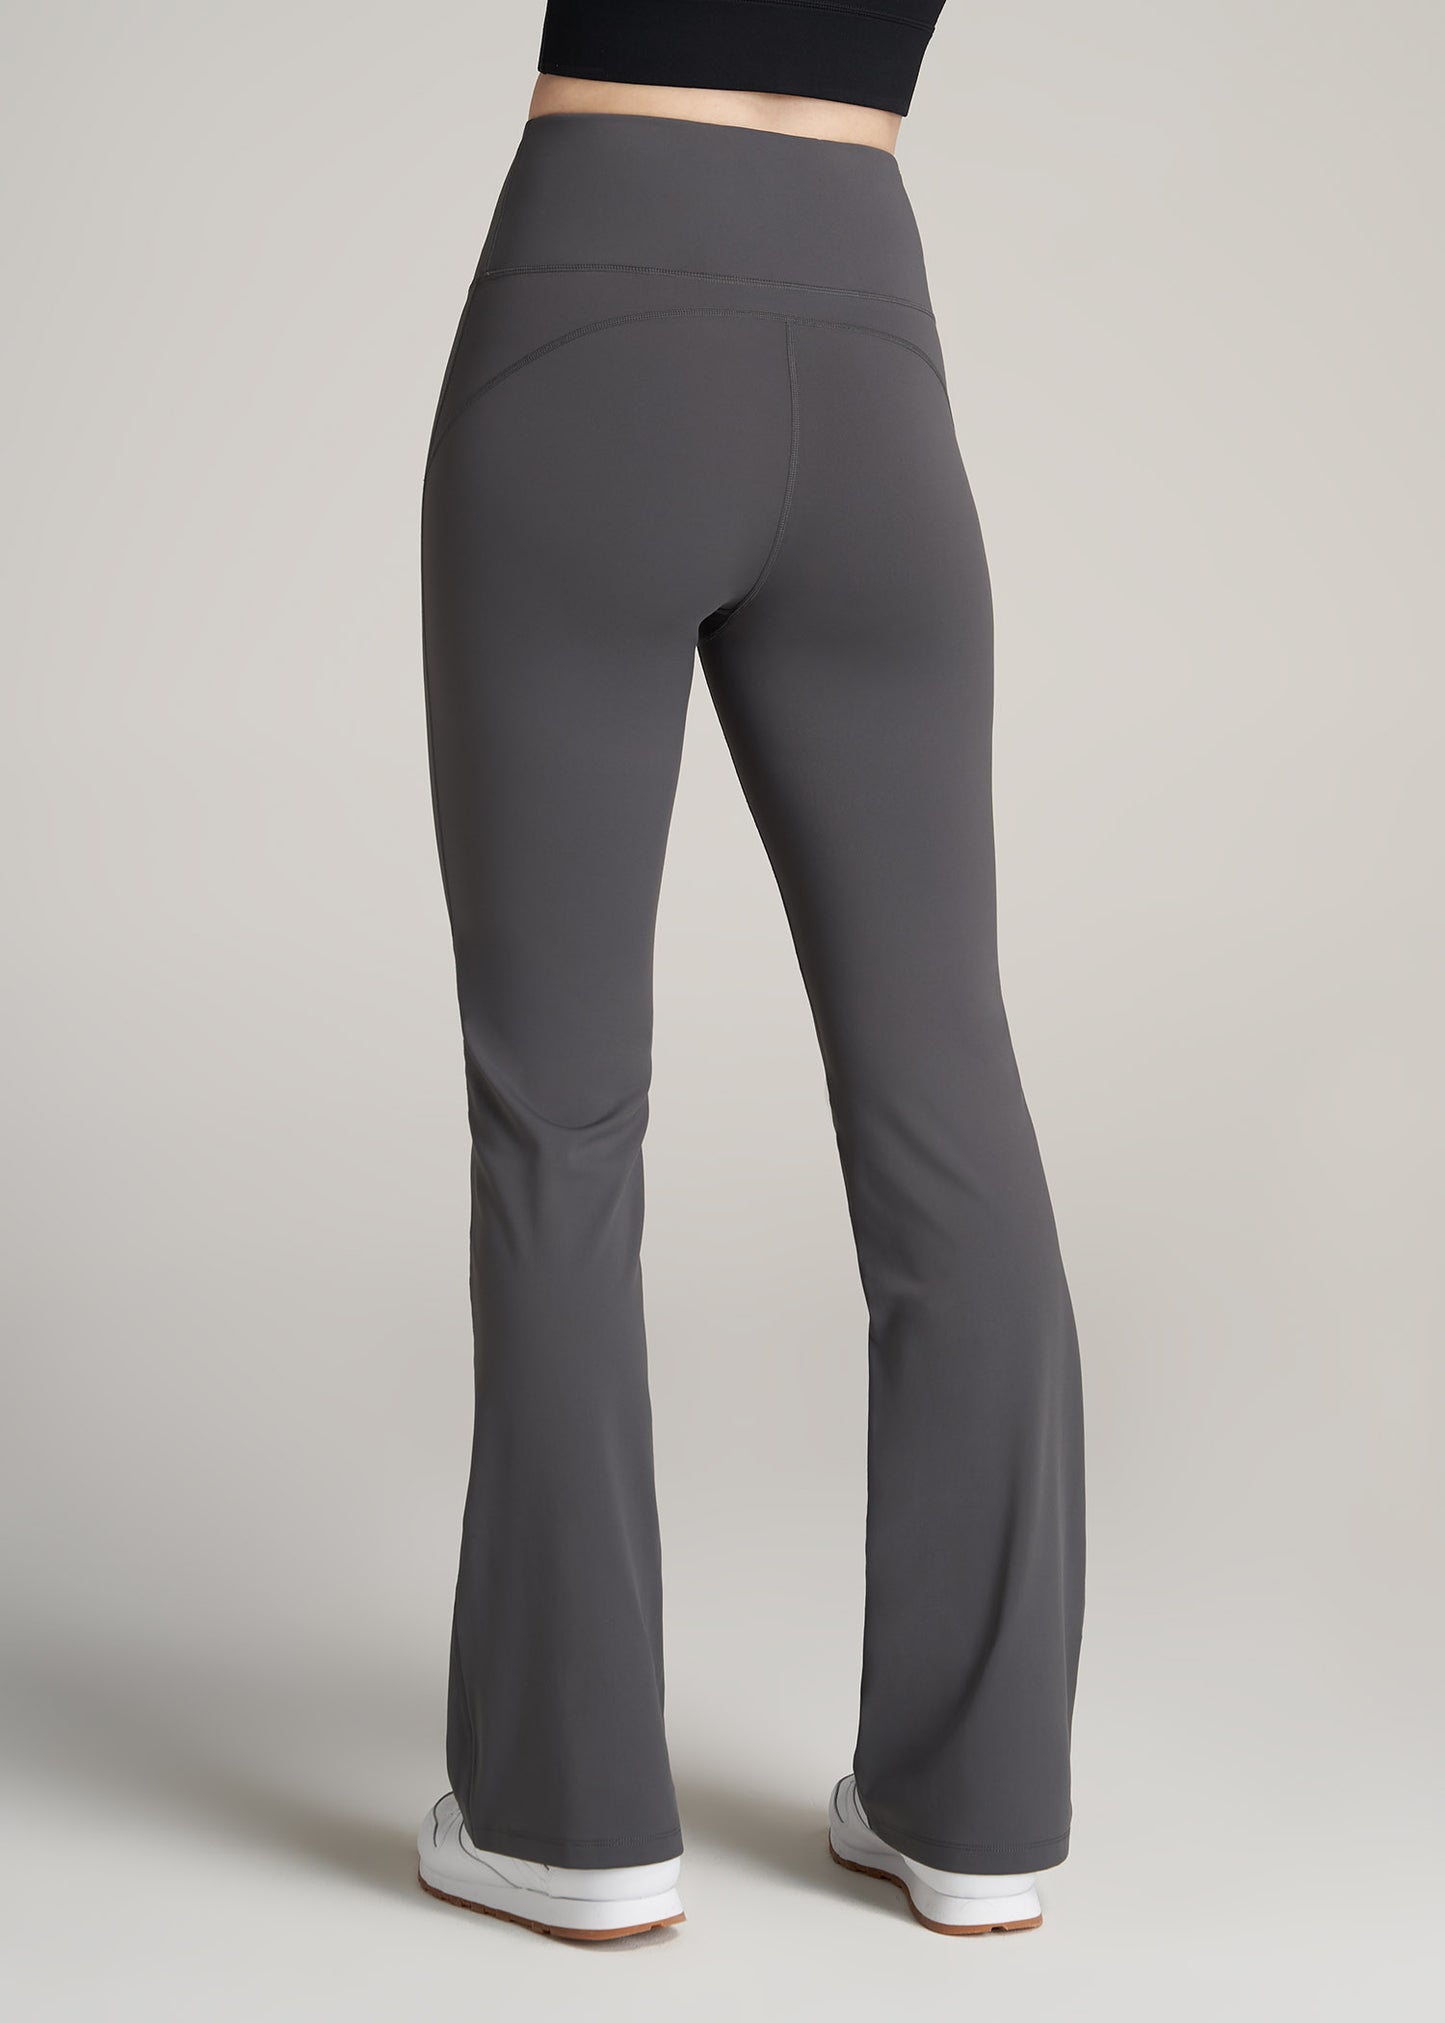 Workout Pants That Aren't Skin-Tight: My Search At Athleta  Jogger pants  outfit women, Joggers outfit, Athleta outfits